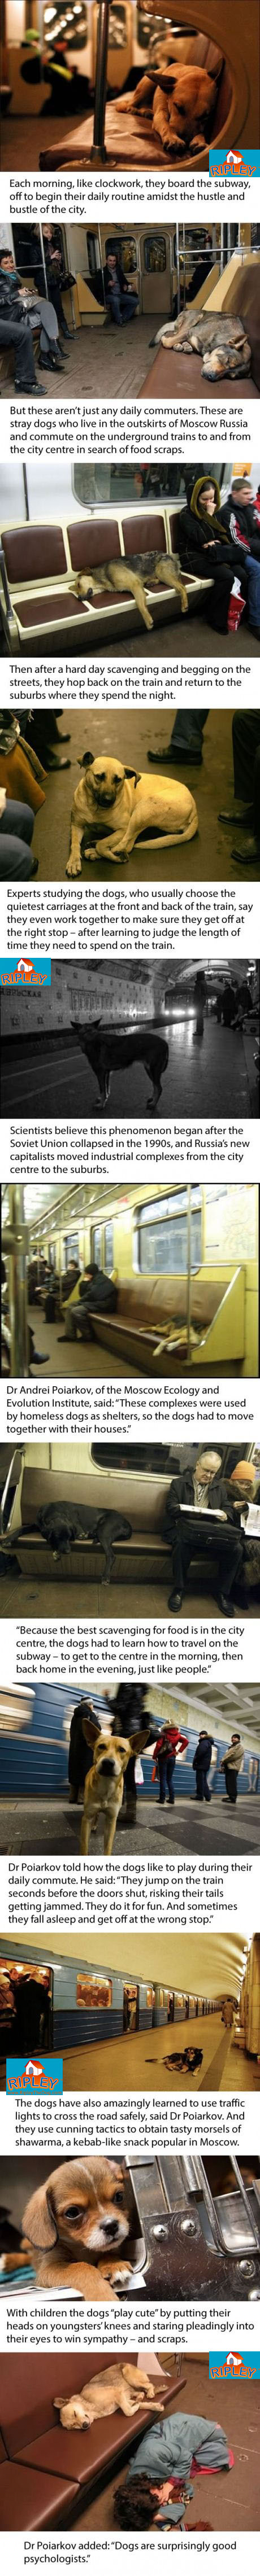 dogs on moscow suway